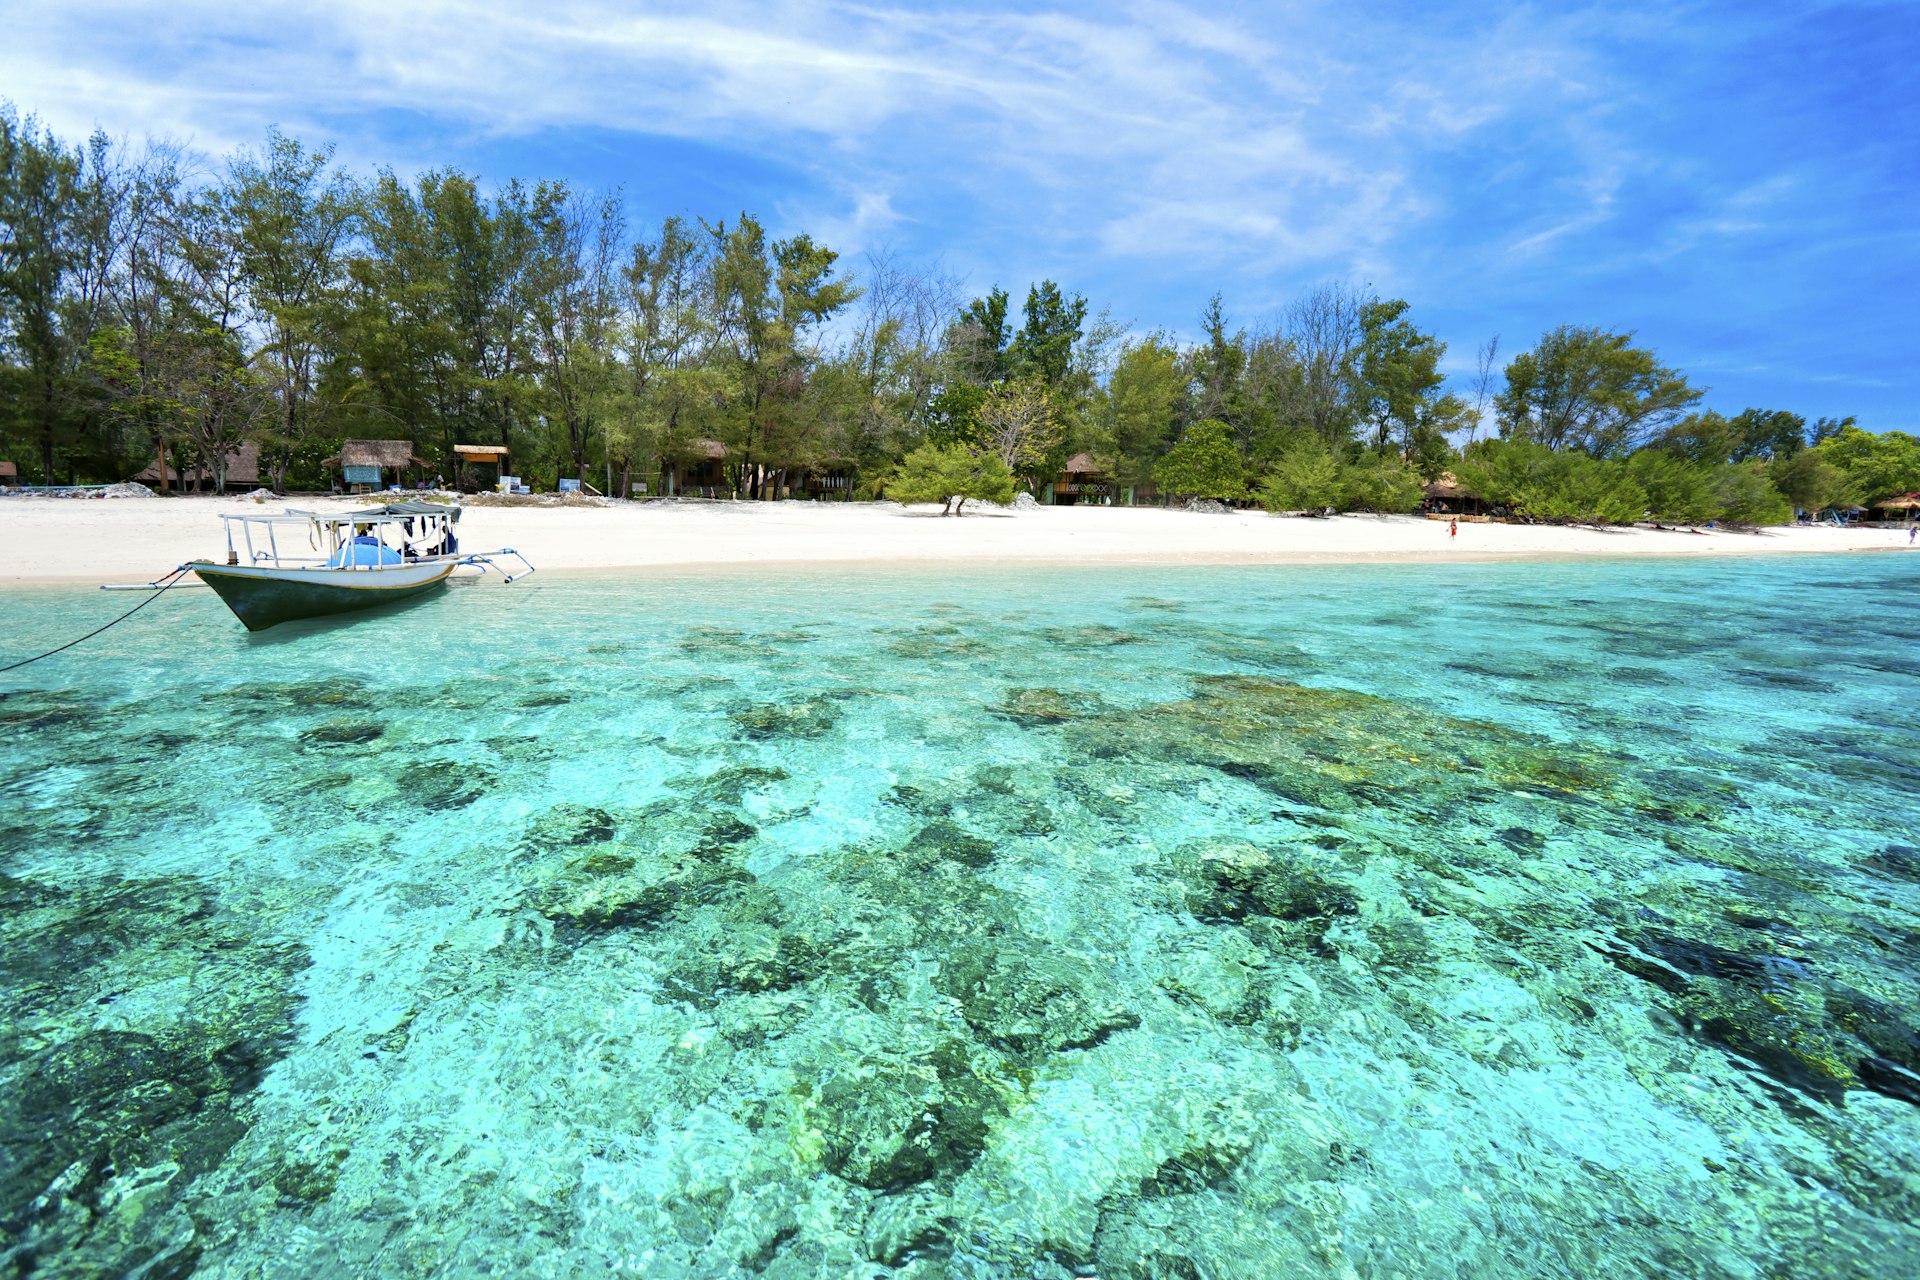 A boat sits near the sandy shore in clear turquoise waters